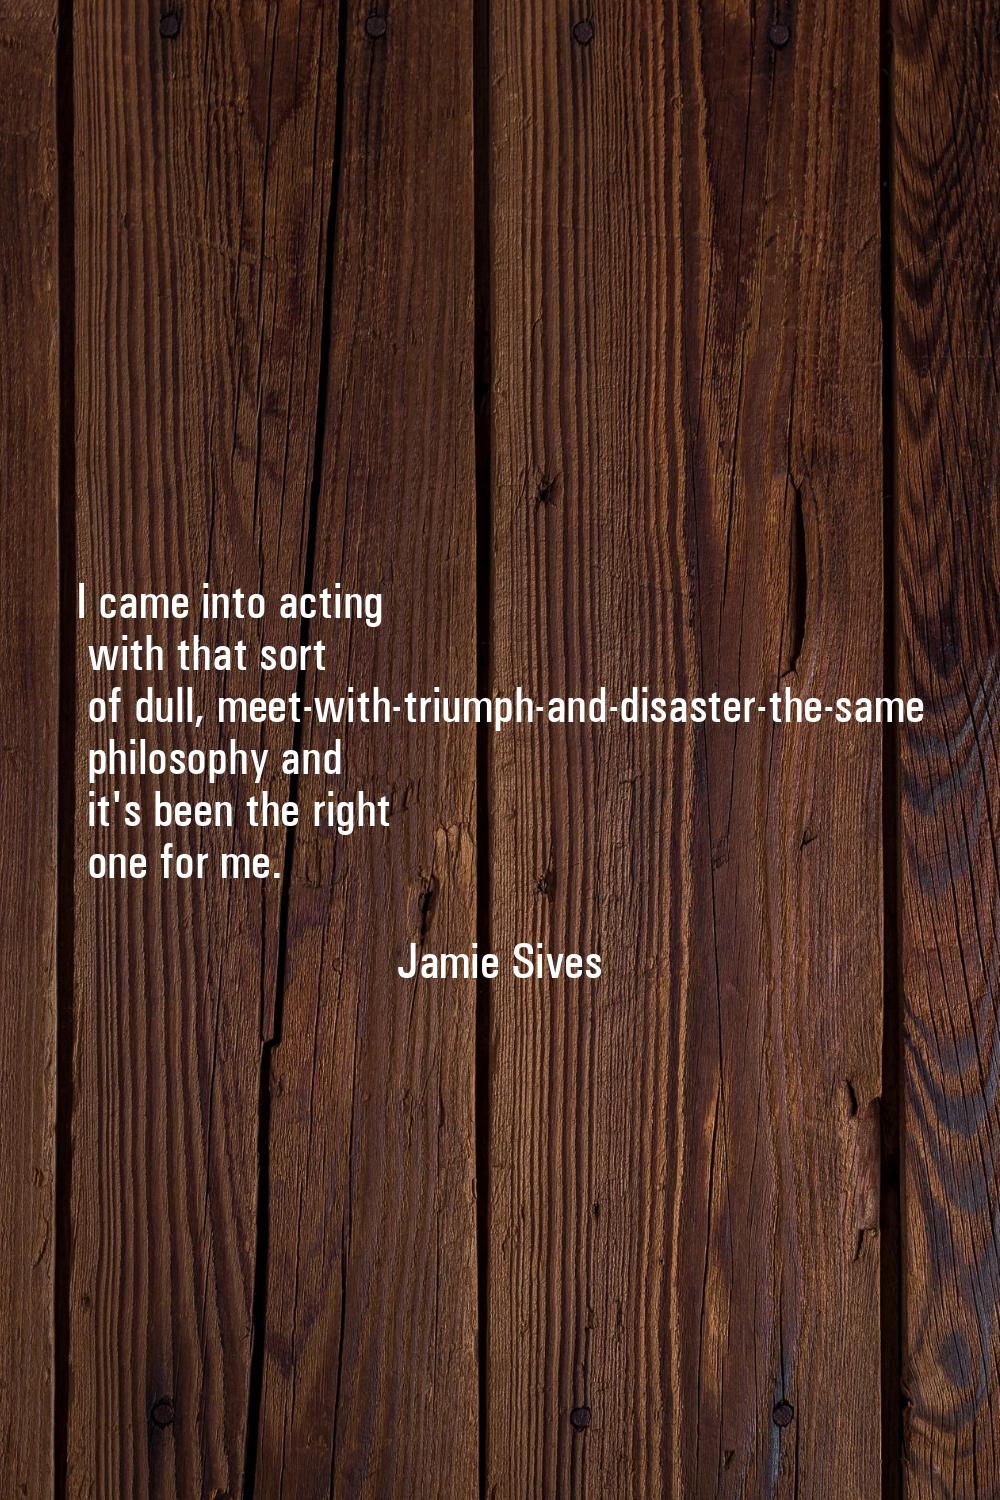 I came into acting with that sort of dull, meet-with-triumph-and-disaster-the-same philosophy and i